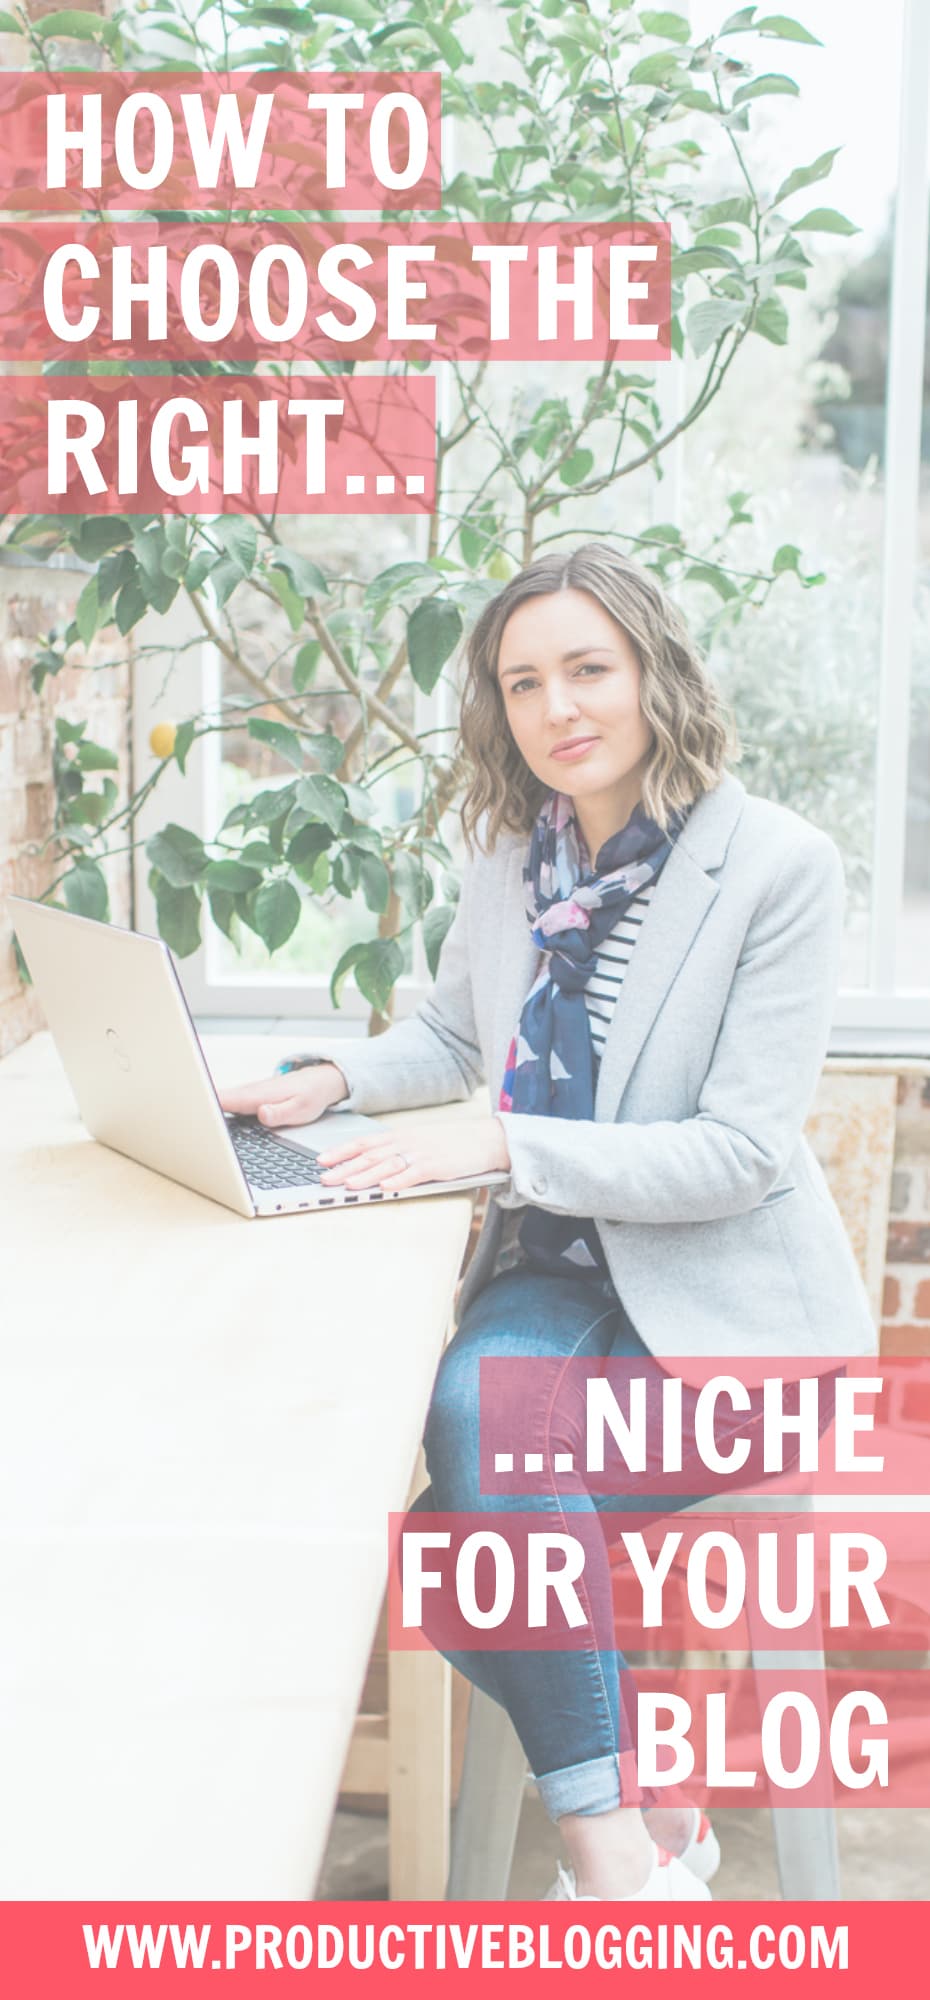 Choosing your blog topic can be so hard! There are so many options. You can blog about almost anything. But that makes it so tricky to decide on the right niche. Read on to discover how to choose the right niche for your blog – and whether you really need a one at all! #niche #bloggingniche #blogniche #blog #blogging #blogger #bloggingtips #blogpost #productiveblogging #productivity